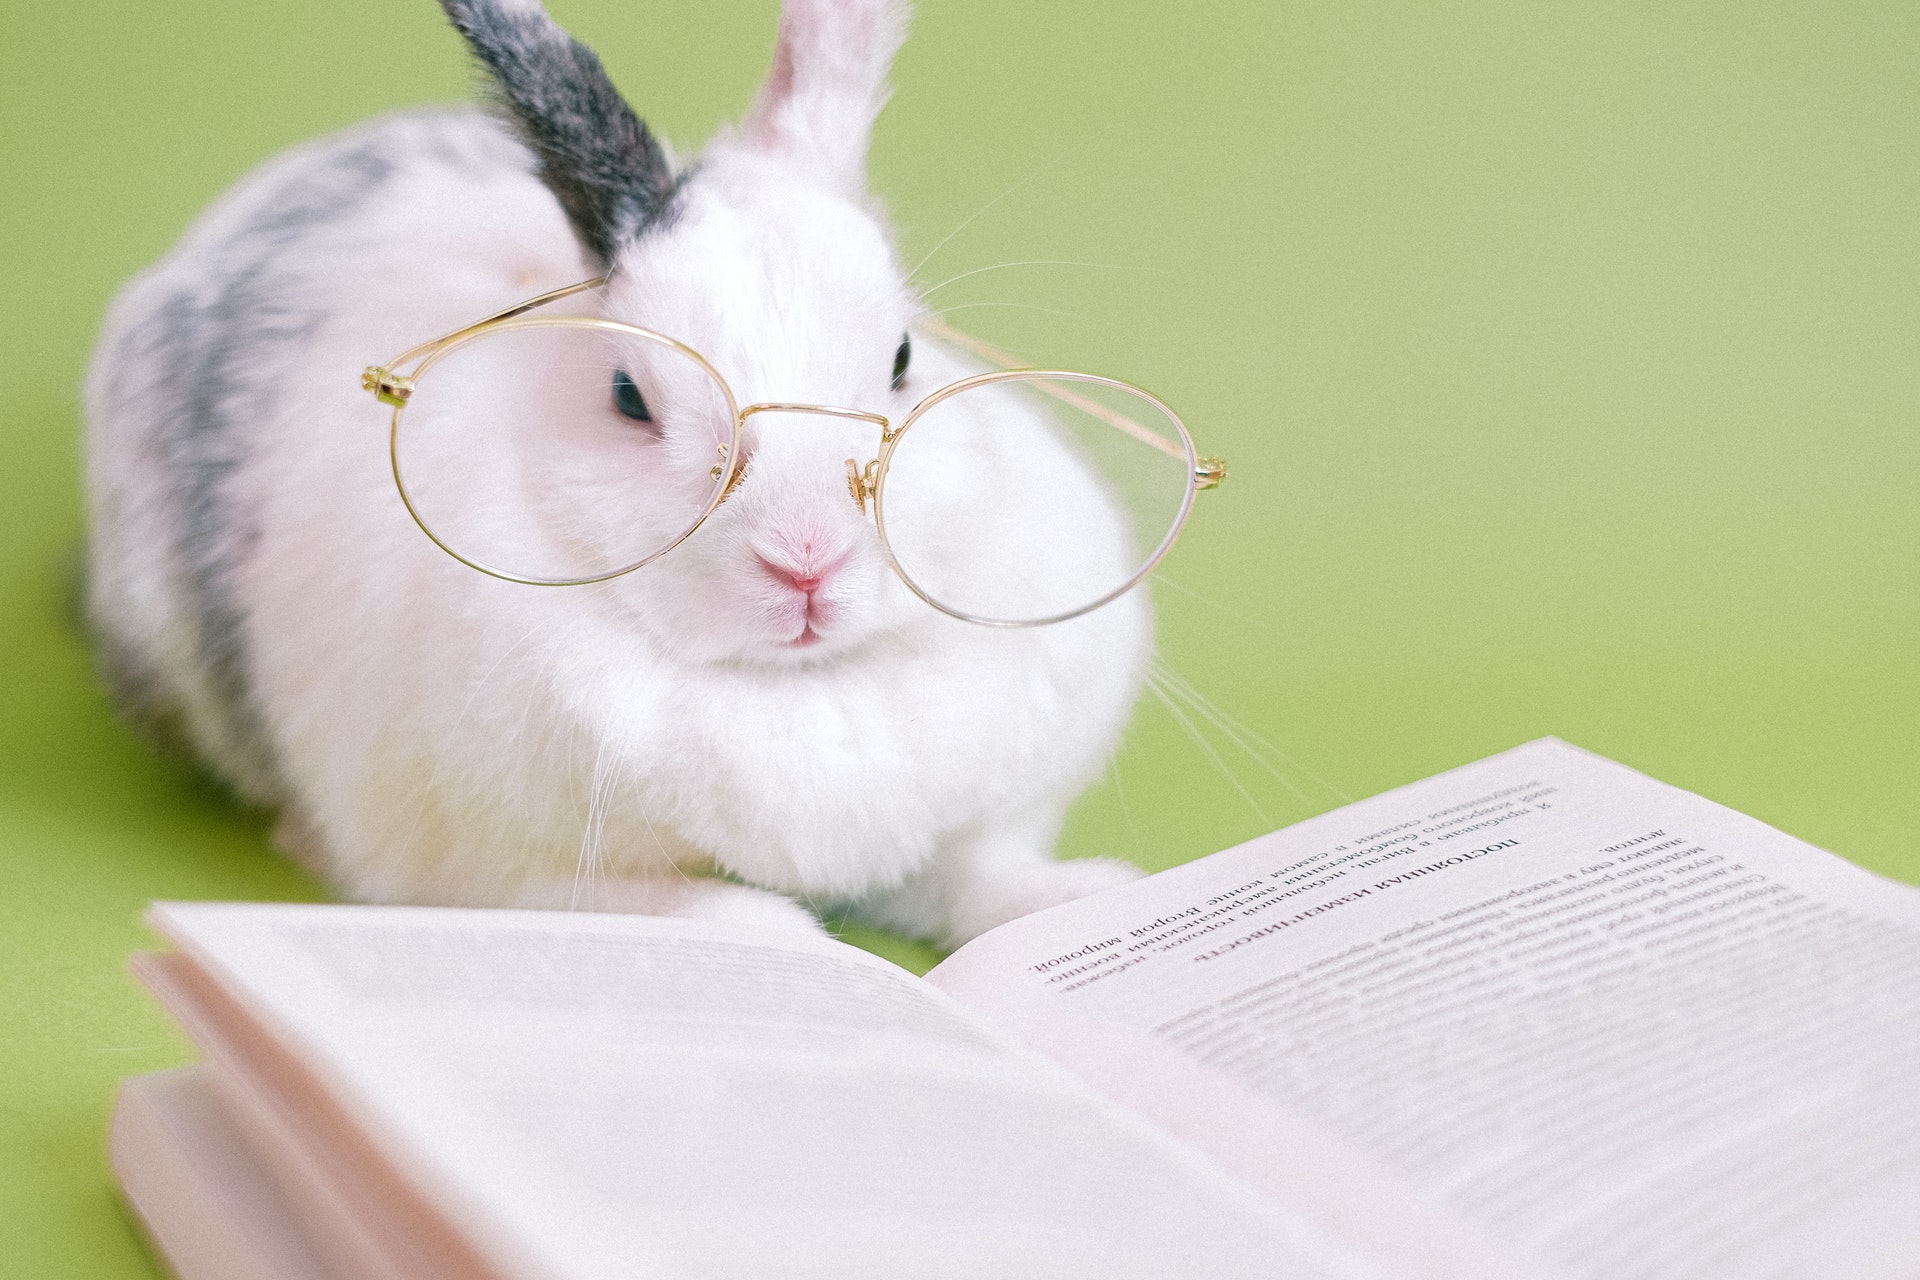 white rabbit with glasses on reading a book